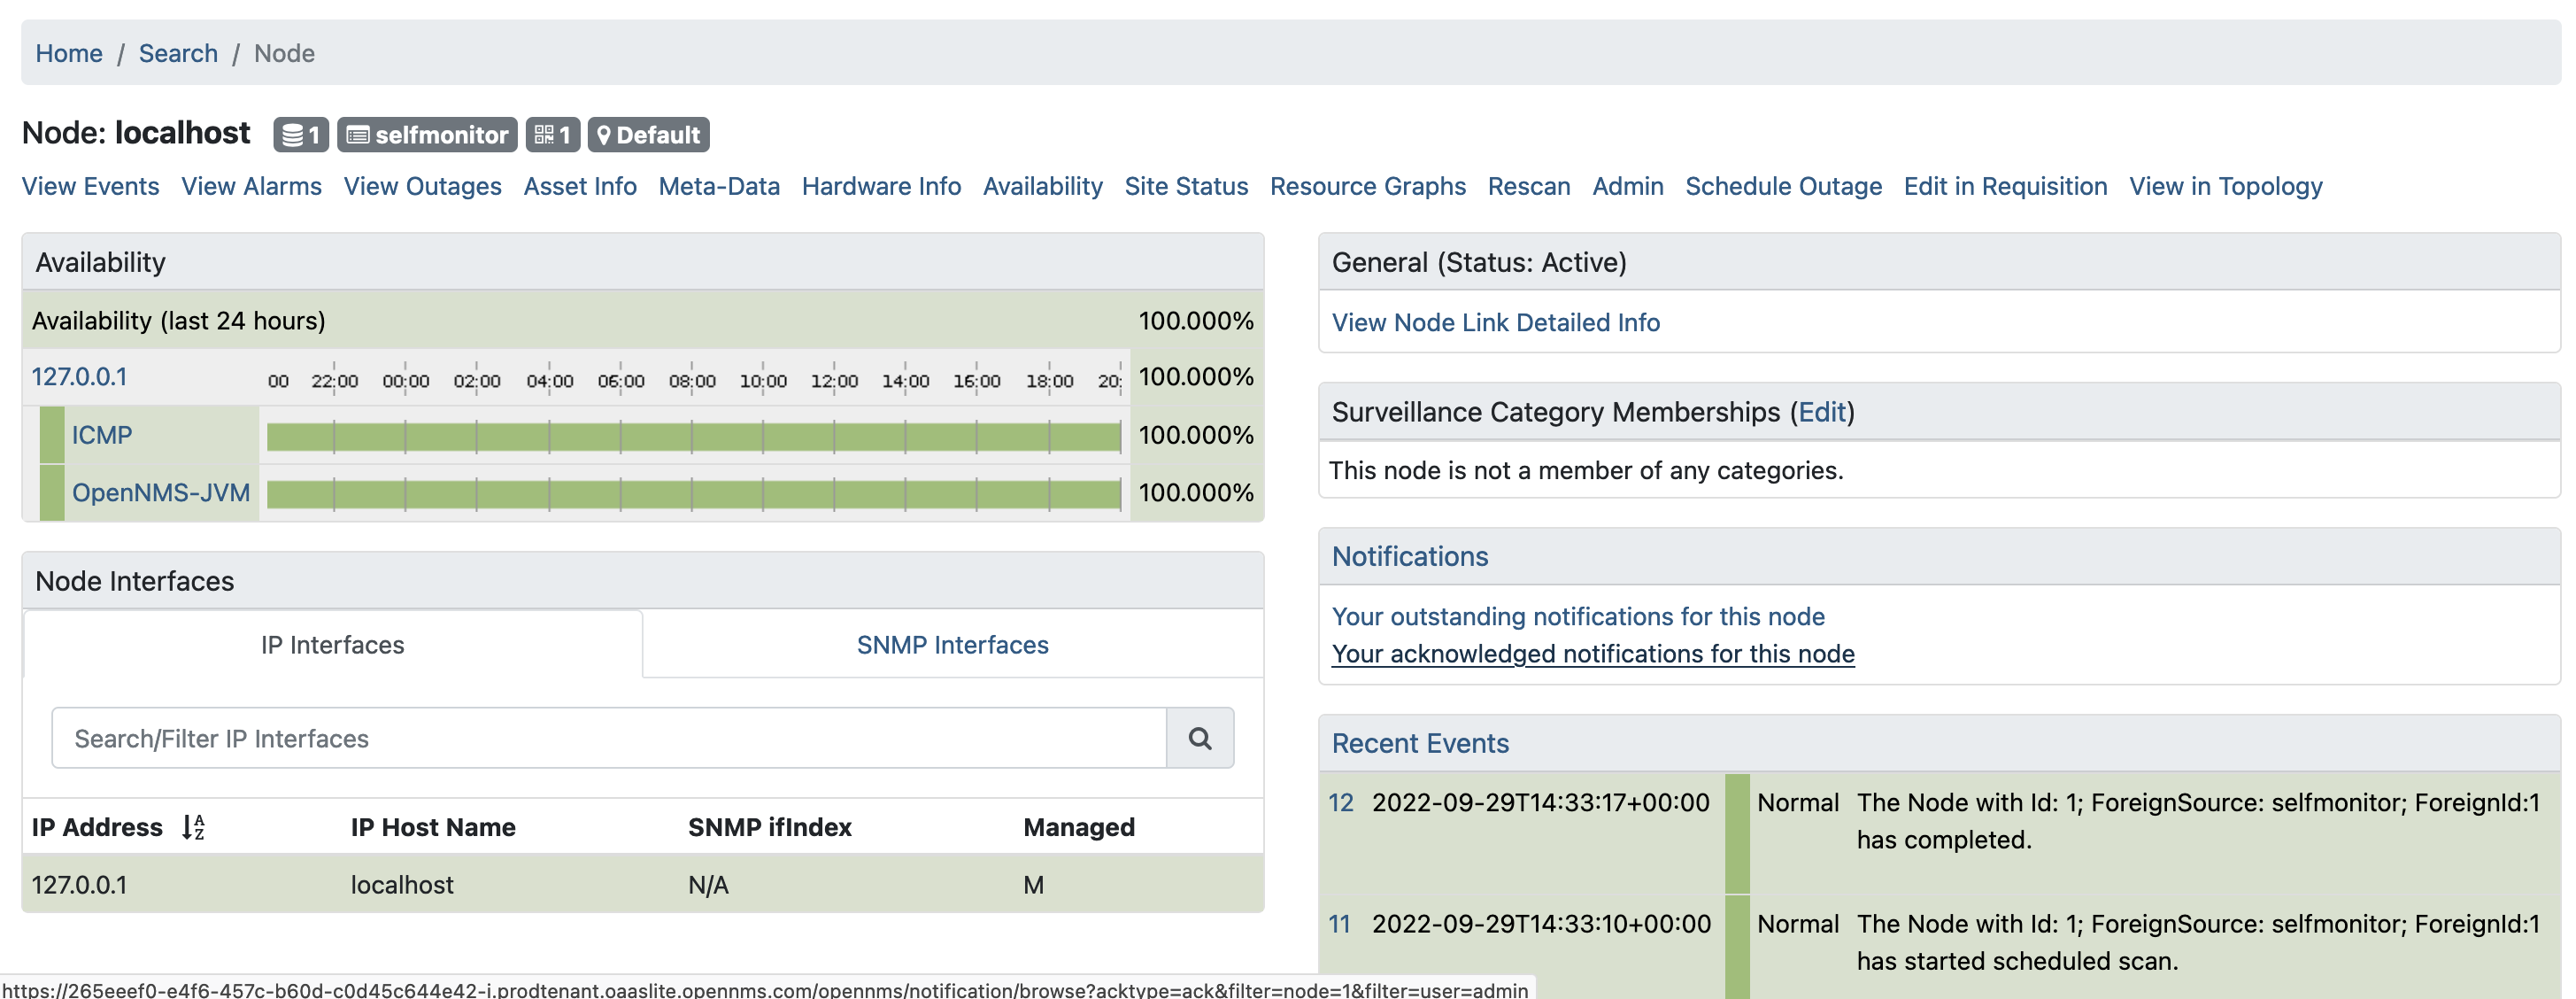 Horizon dashboard displaying service availability statistics for the localhost node